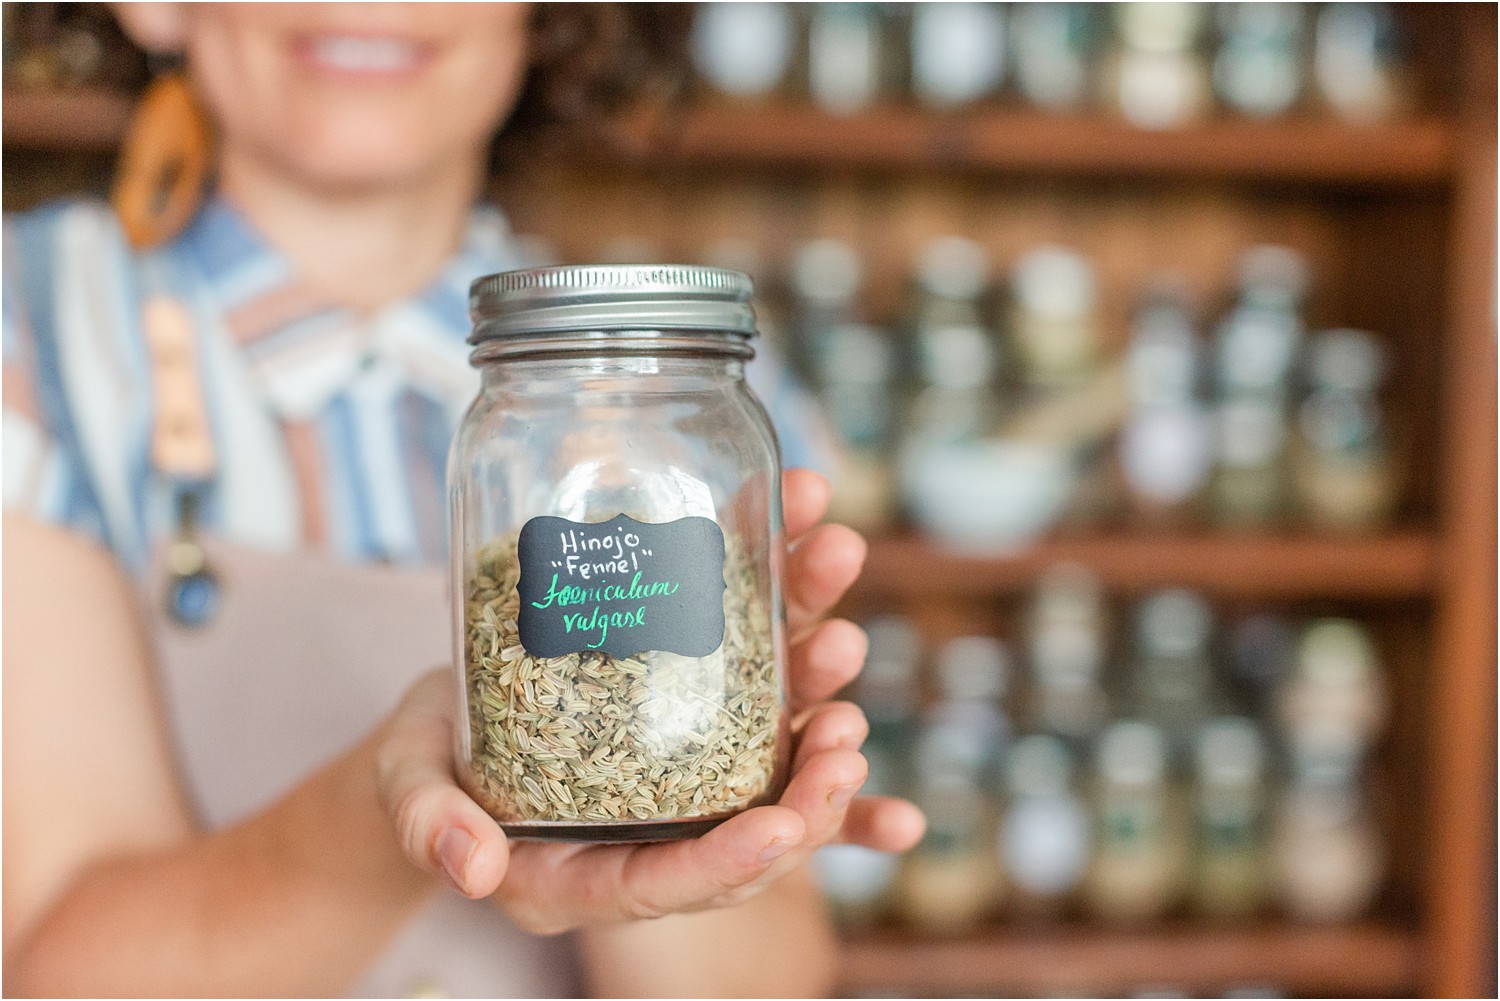 herbs used for healing and wellness by business owner